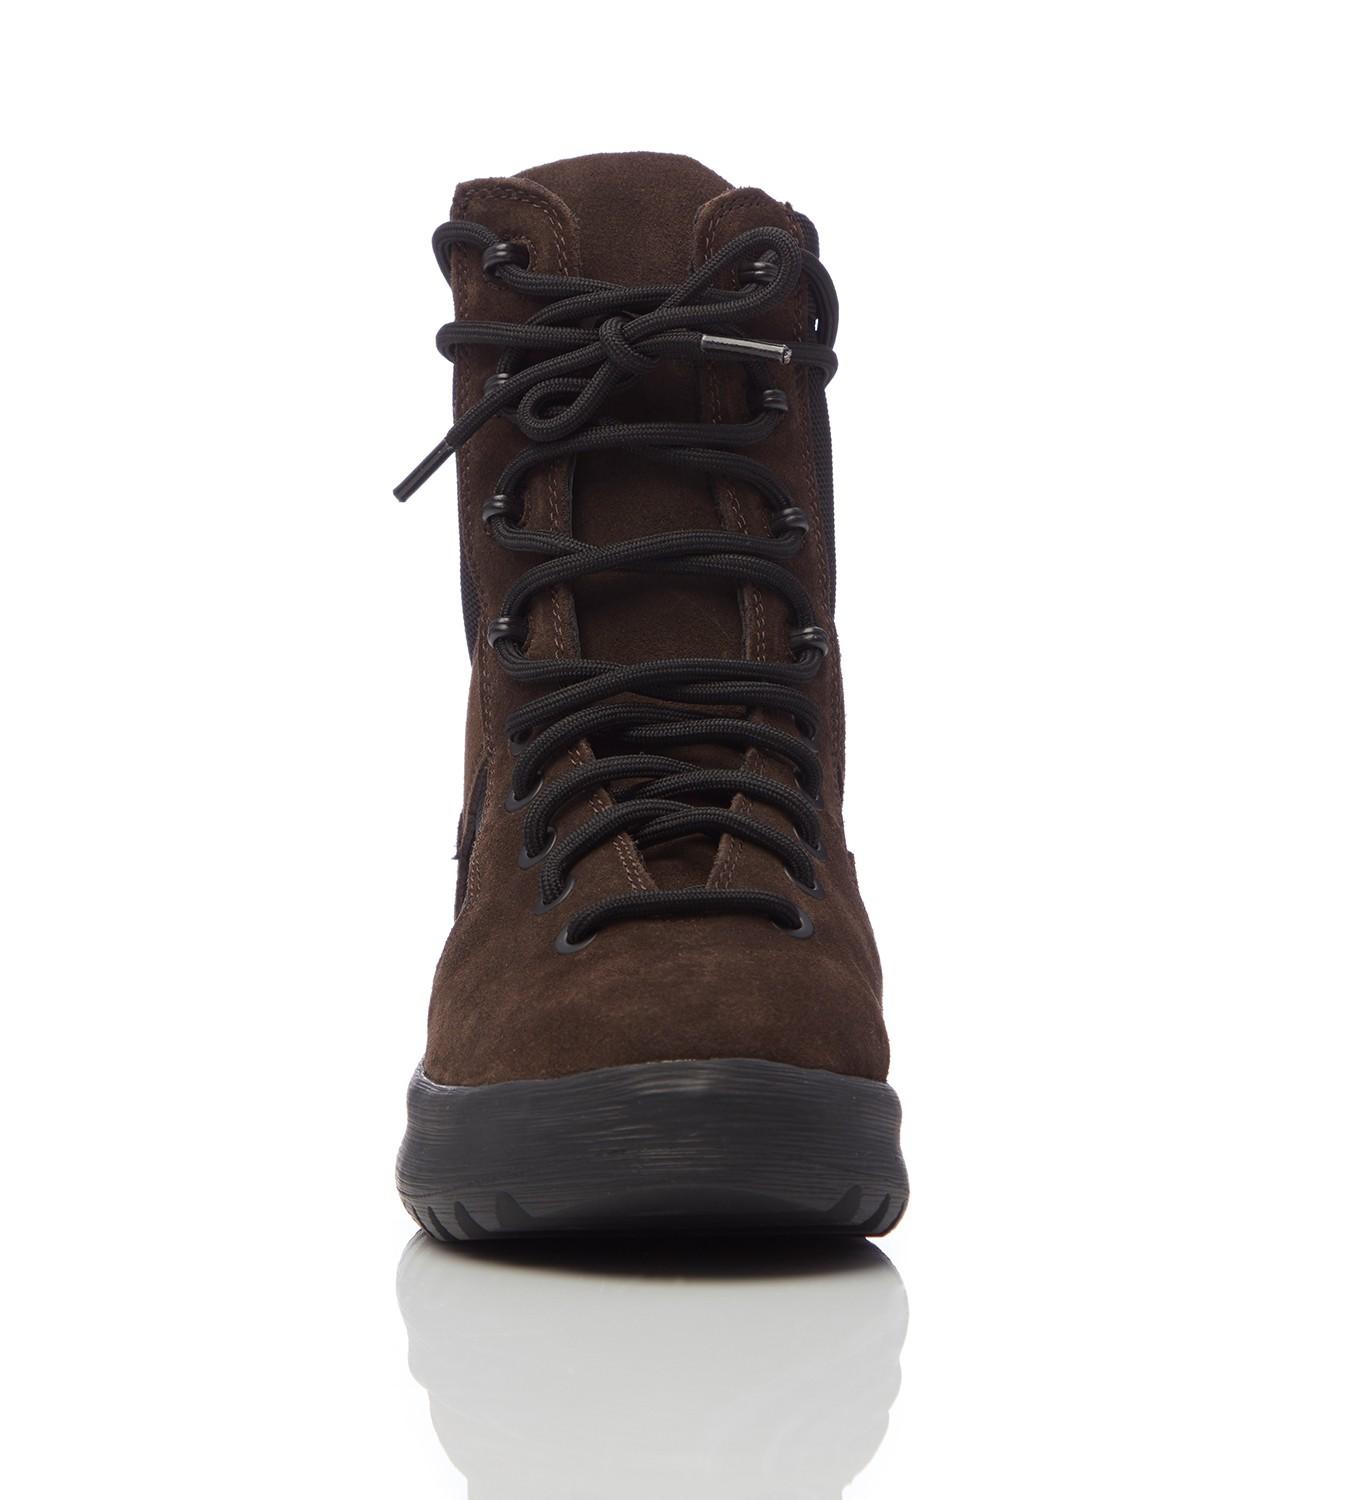 Yeezy Suede Season 7 Military Boots in Black for Men - Lyst